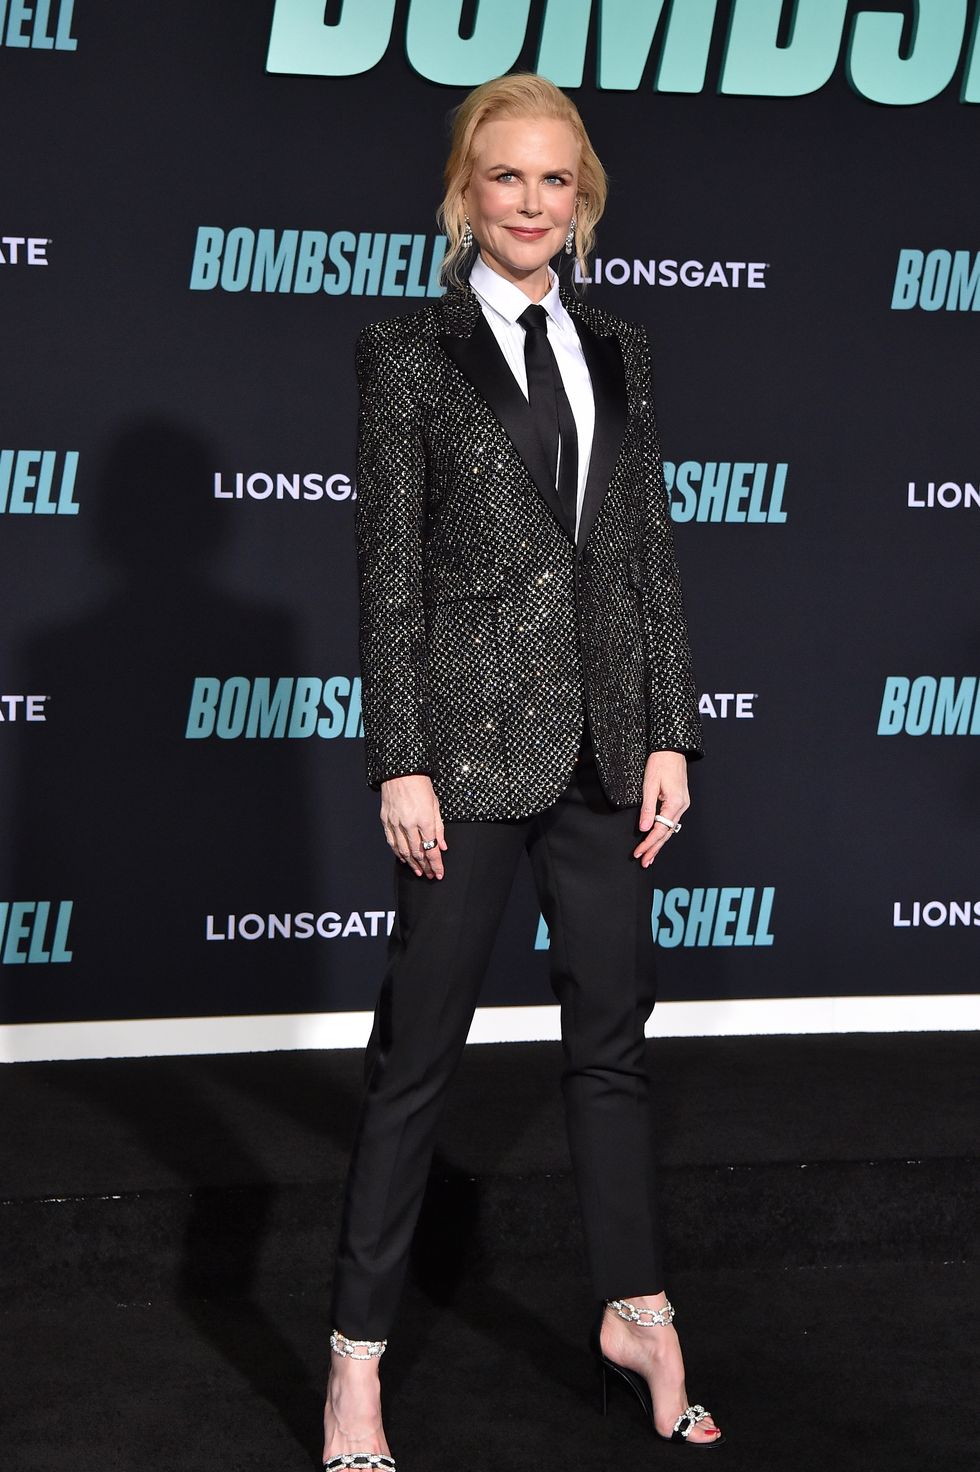 Special Screening Of Liongate's "Bombshell" - Arrivals